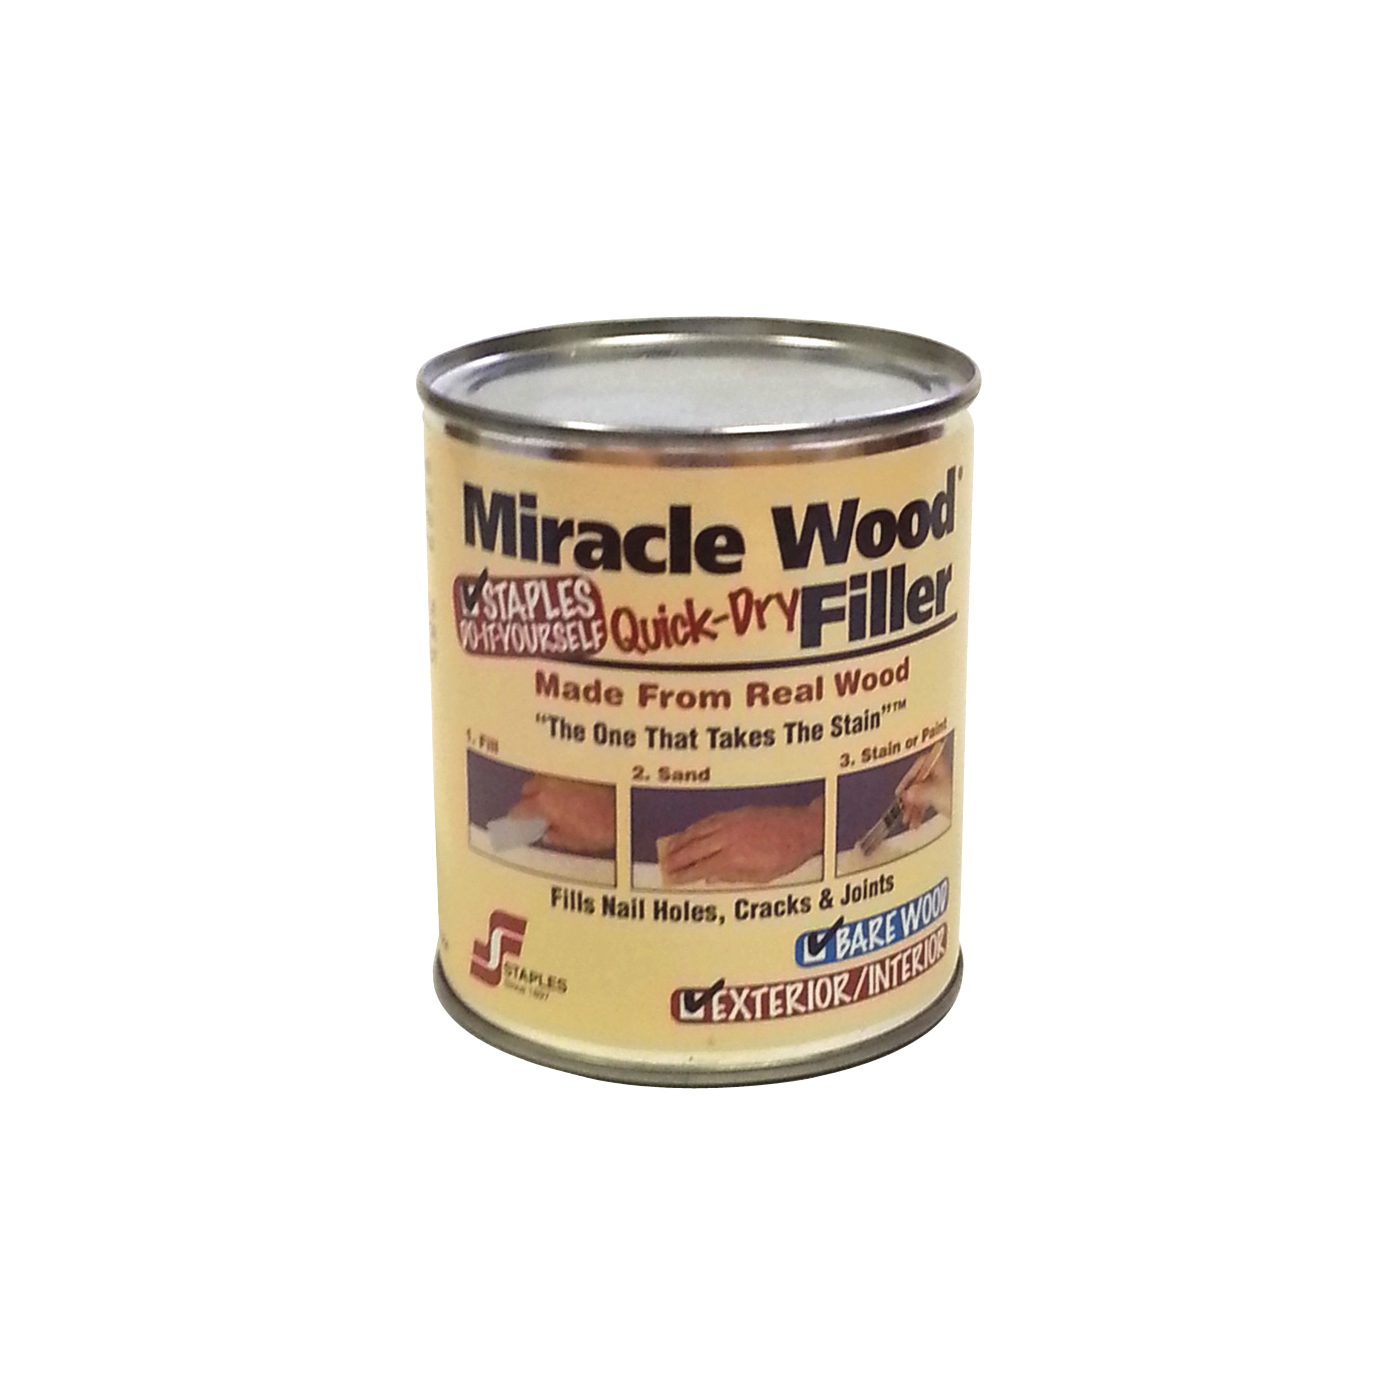 Miracle Wood 903 Wood Filler, Putty, Strong Solvent, Natural, 1 lb